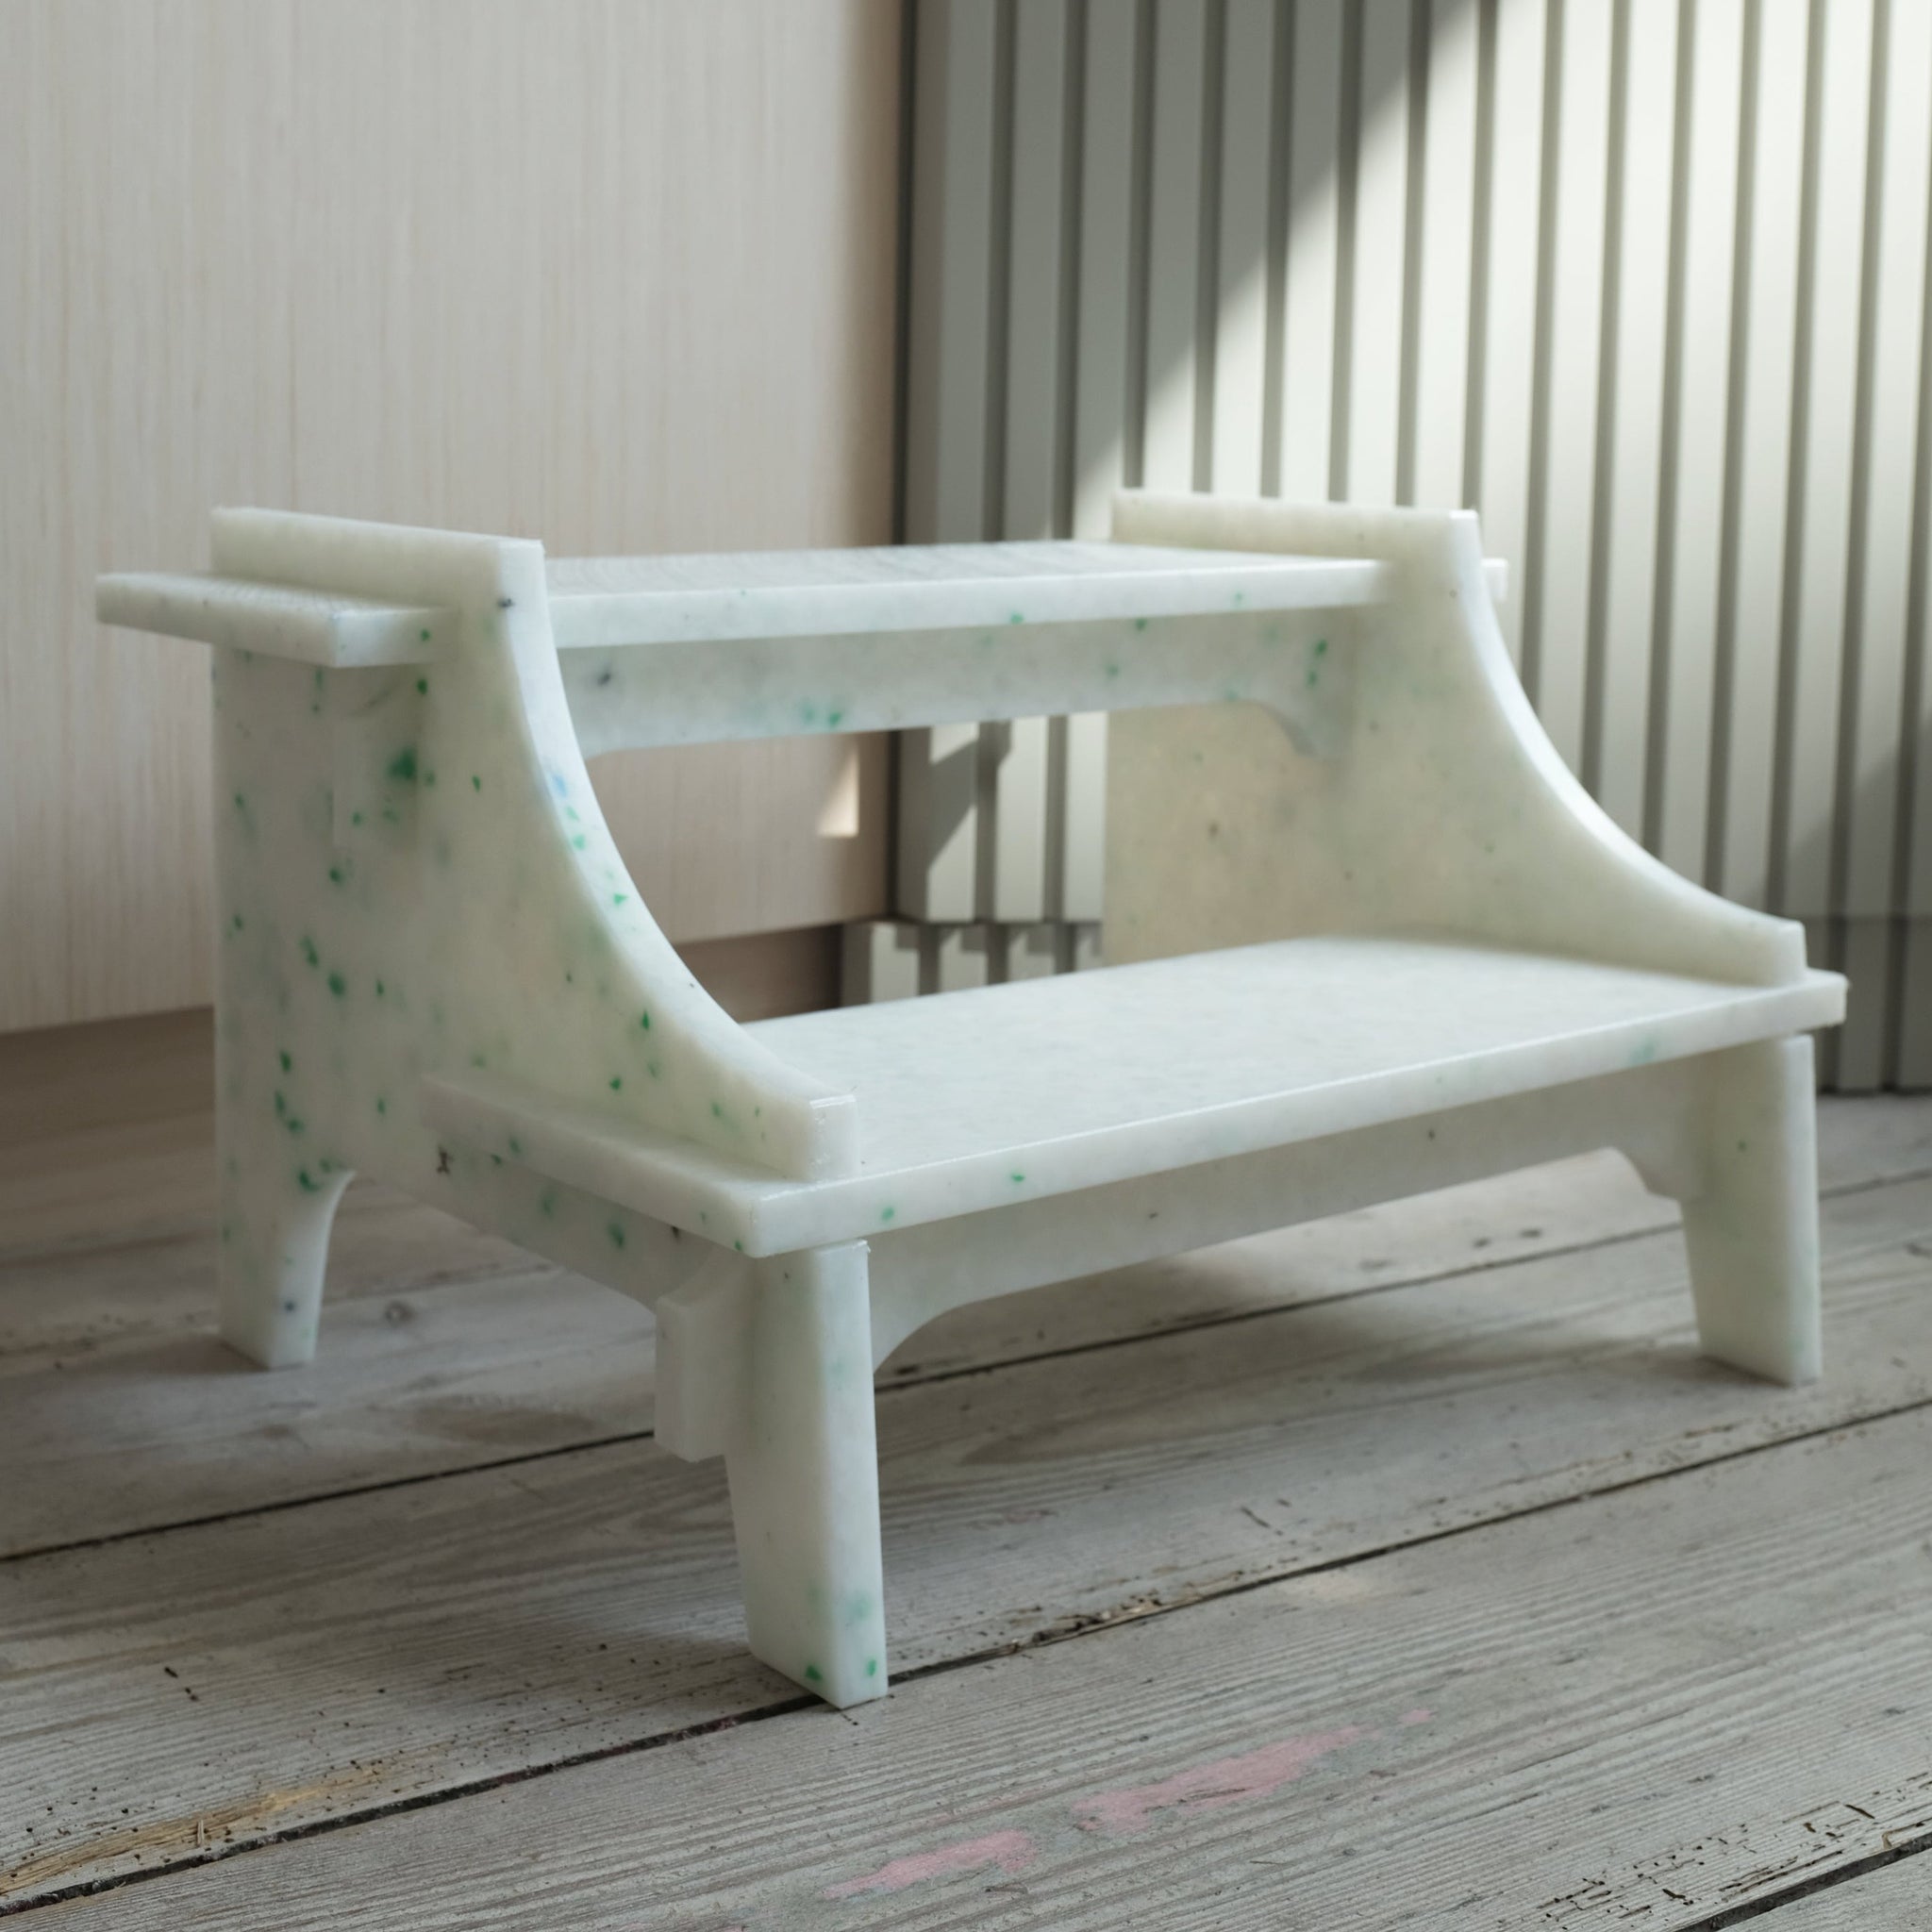 WHITE SMALL STEP STOOL BY THE MINIMONO PROJECT - BRAND FOR ECO FRIENDLY - PLAYFUL - MULTI FUNCTIONAL - SUSTAINABLE - HIGH QUALITY - DESIGN FURNITURE FROM RECYCLED PLASTIC FOR BOTH ADULT AND CHILDREN MADE IN BERLIN GERMANY